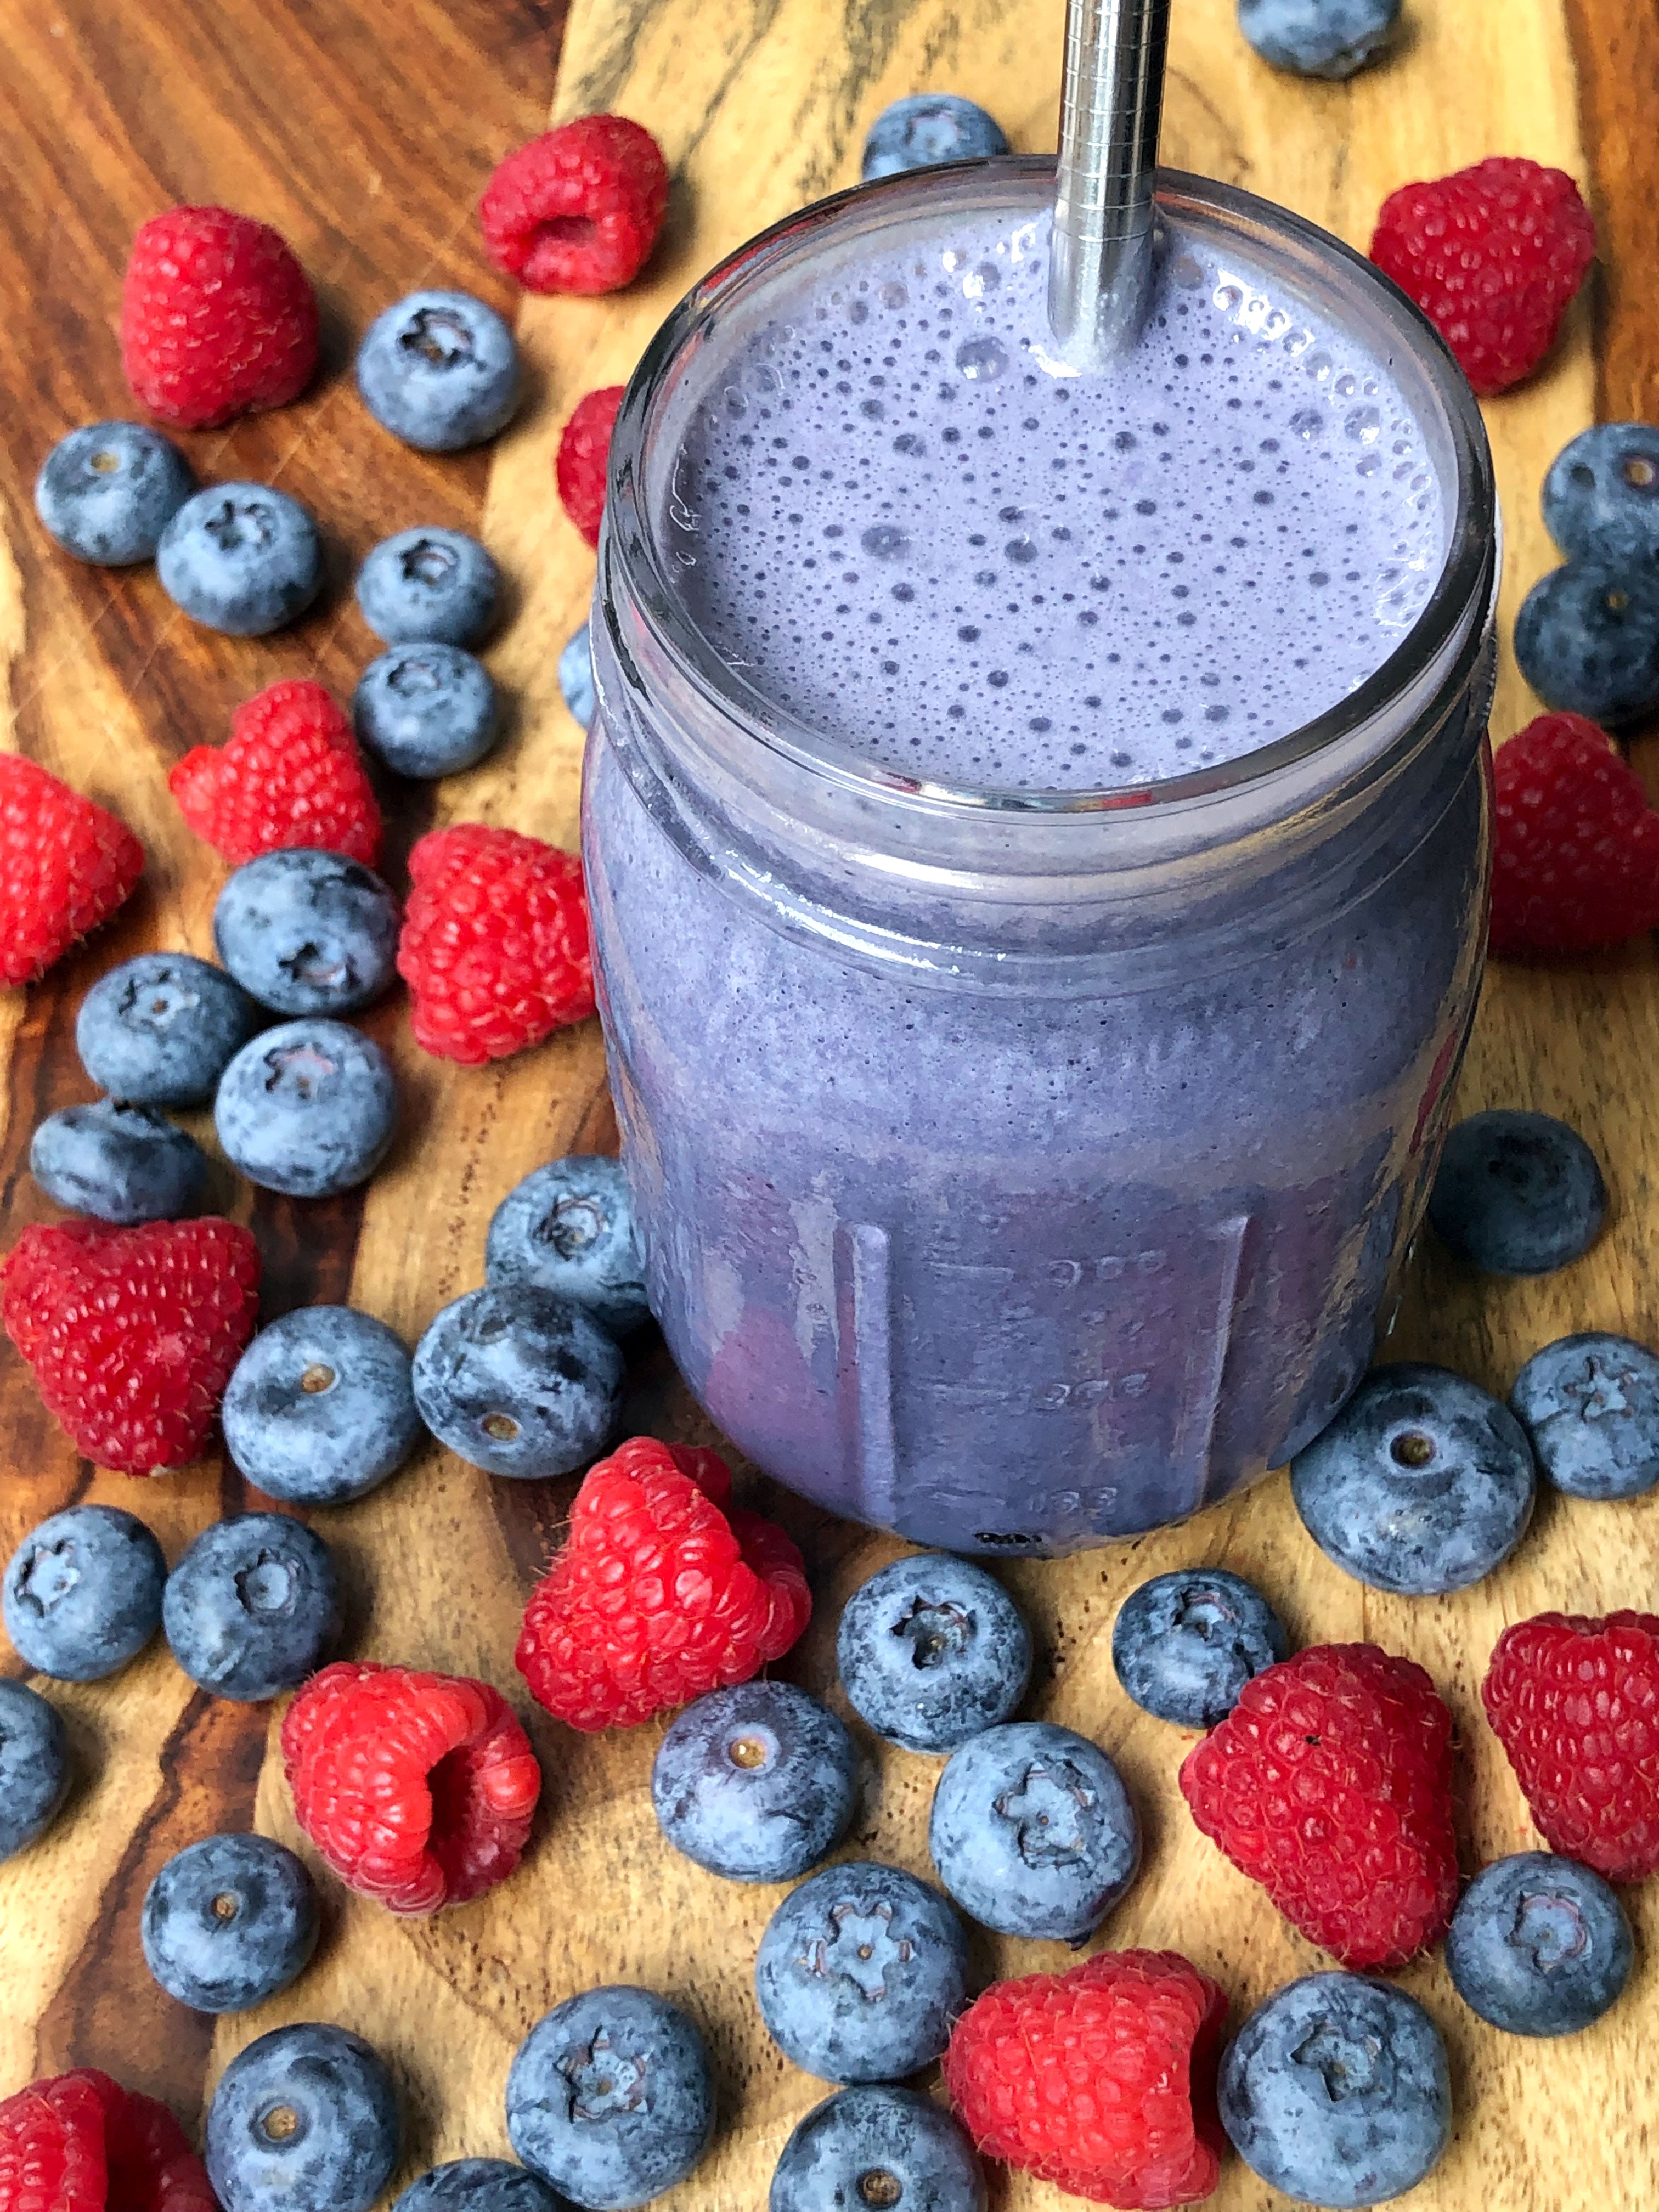 Weight Loss Shakes & Smoothies: Homemade Weight Loss Shakes to